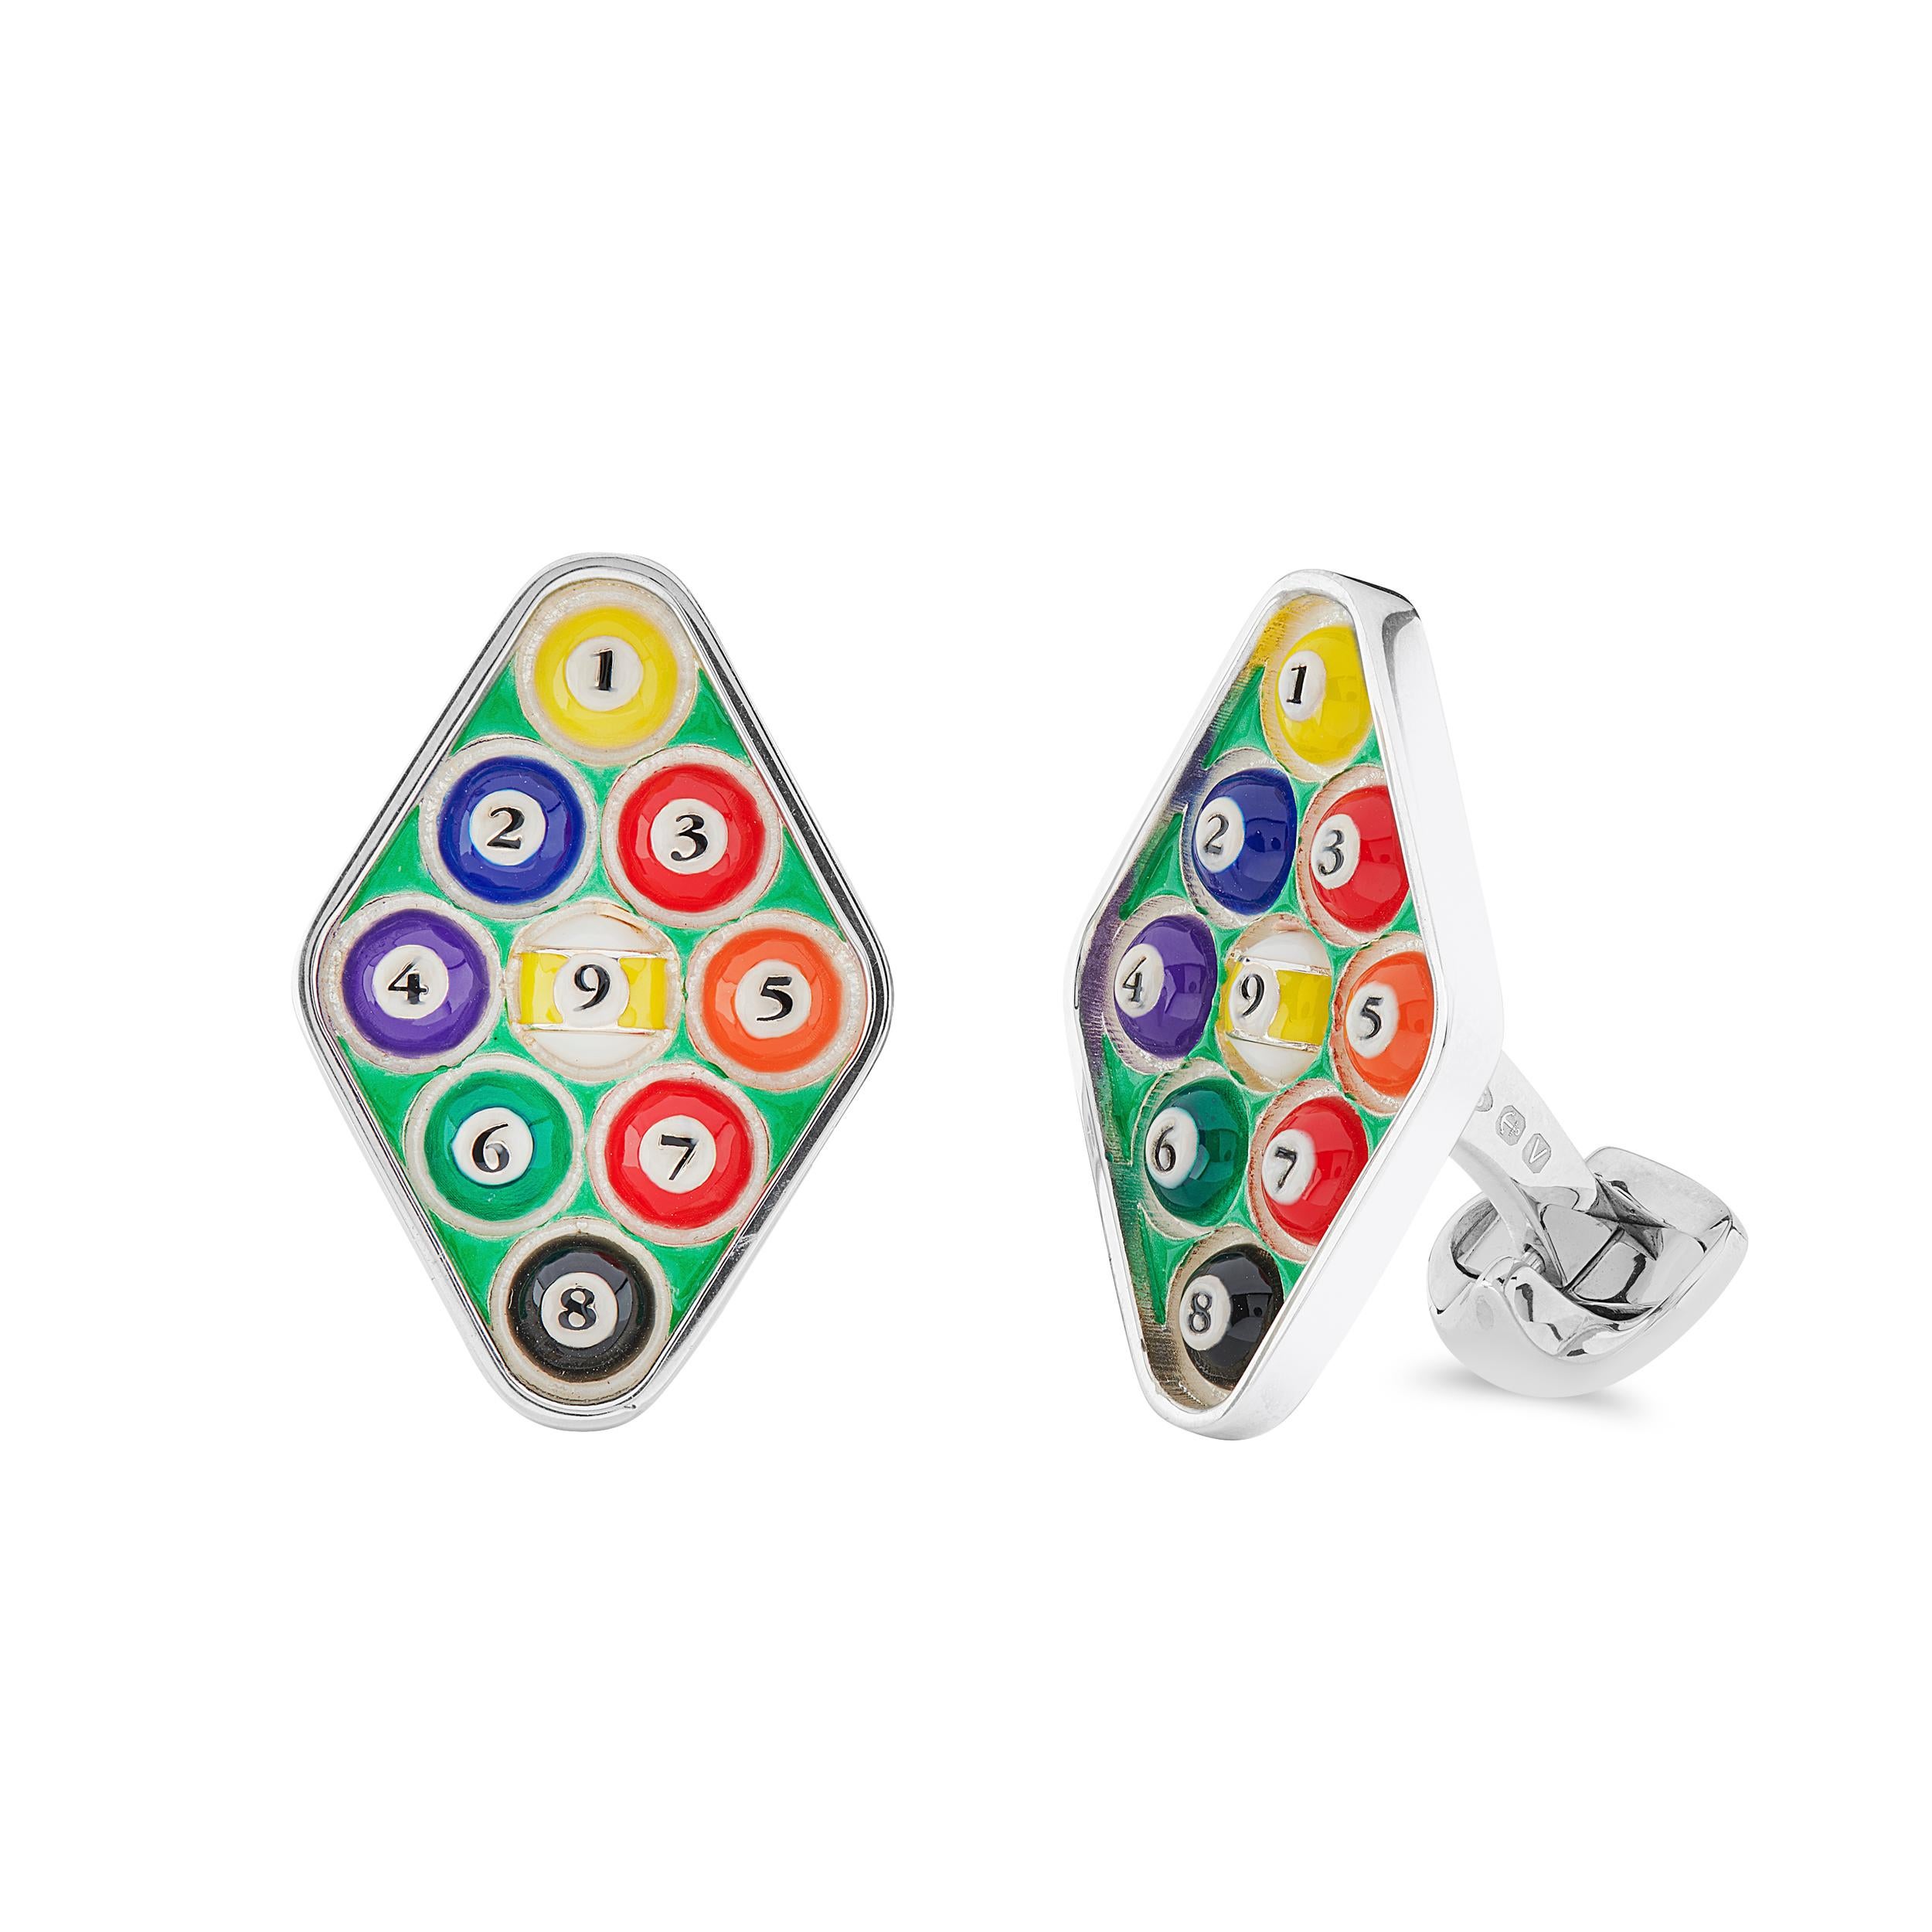 DEAKIN & FRANCIS, Piccadilly Arcade, London

These sterling silver pool table design cufflinks feature different colour enamel pool balls and a green enamel face to represent a pool table. Online exclusive to 1st dibs only, these sterling silver